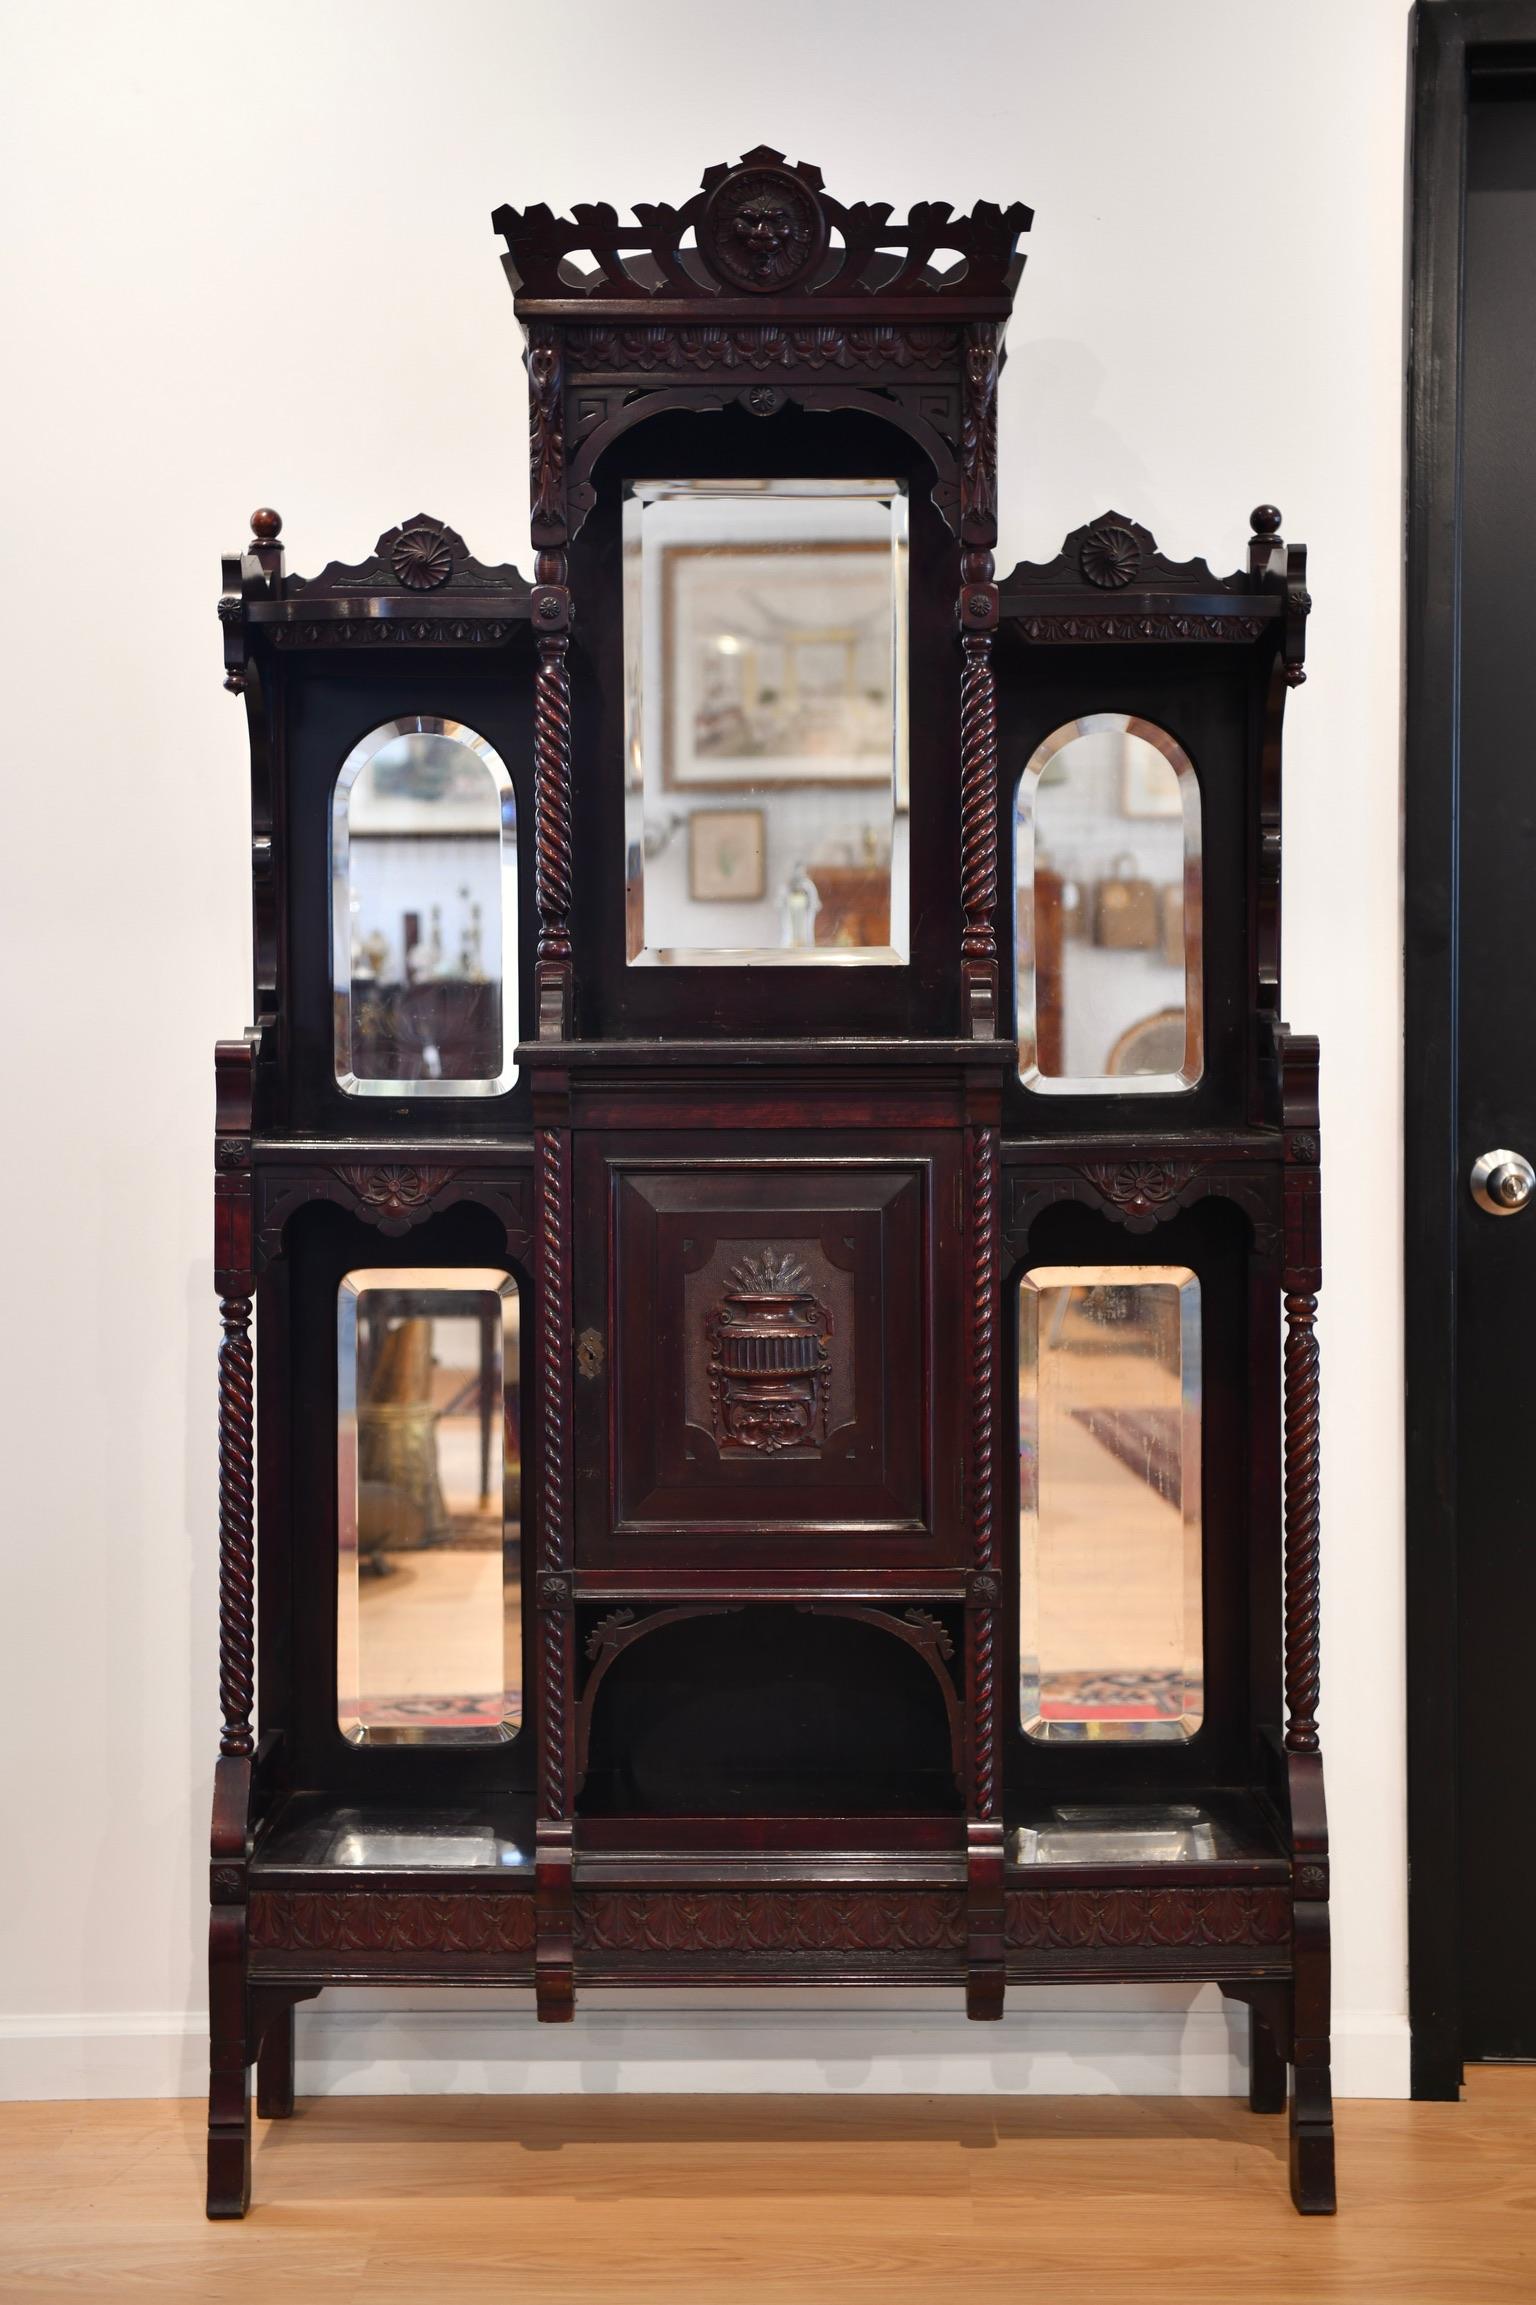 Late 19th century Victorian mahogany entryway etagere, with lion face pediment over spiral posts, open shelves, and five beveled mirrored back panels and a carved center panel cabinet. Some scratching to surfaces, pictured. Dimensions: 77